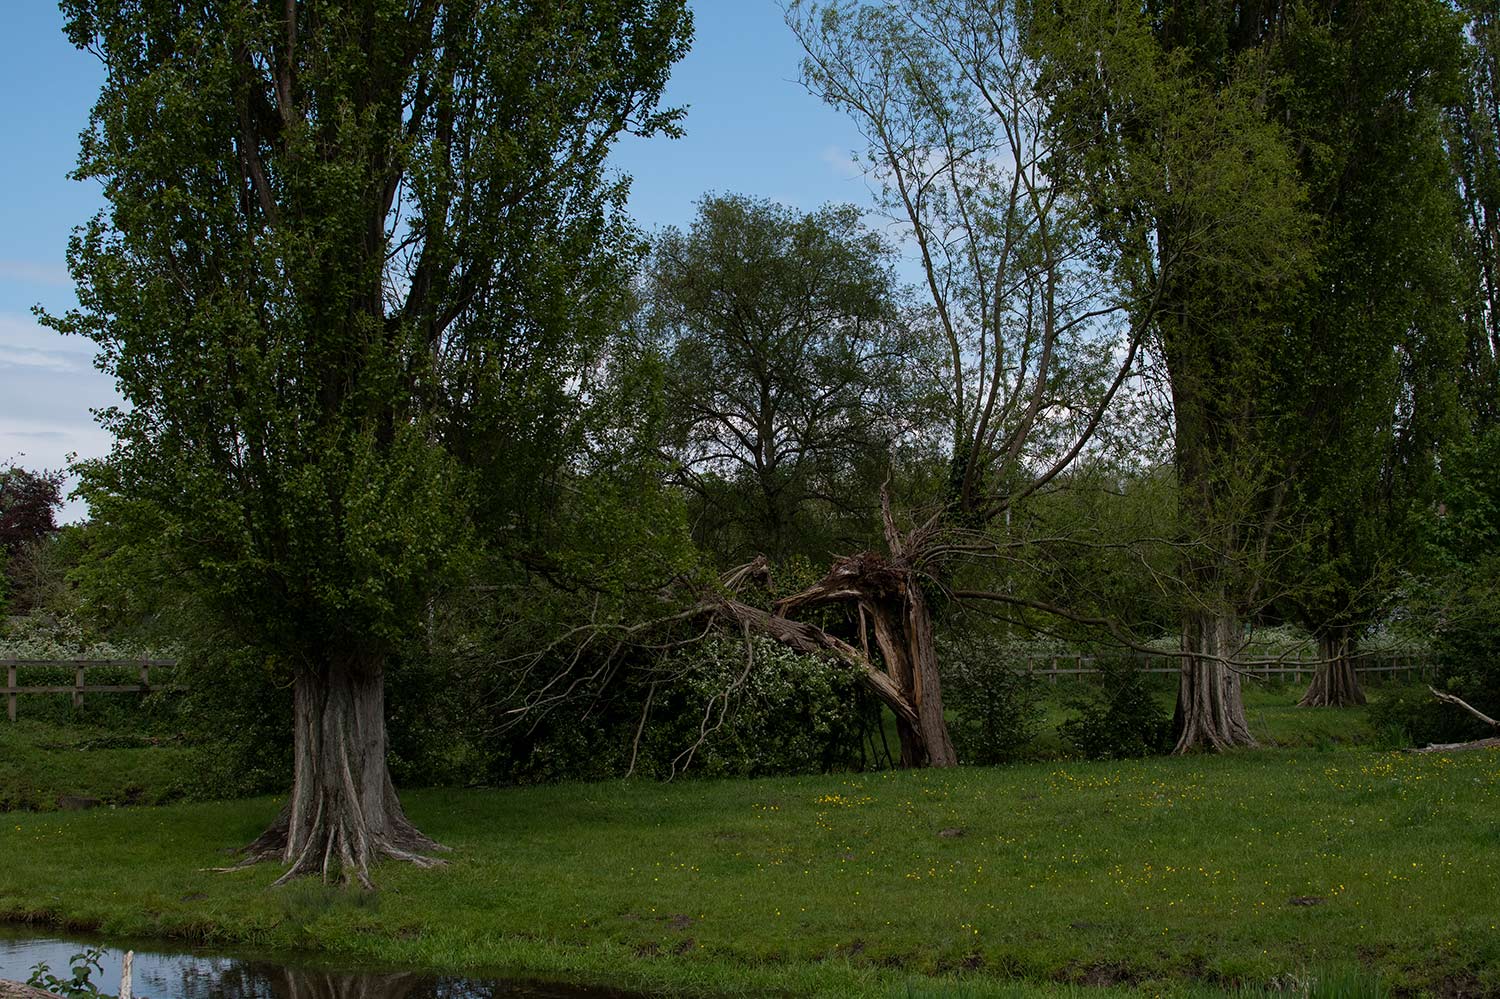 Lombardy Poplars and fallen Willows